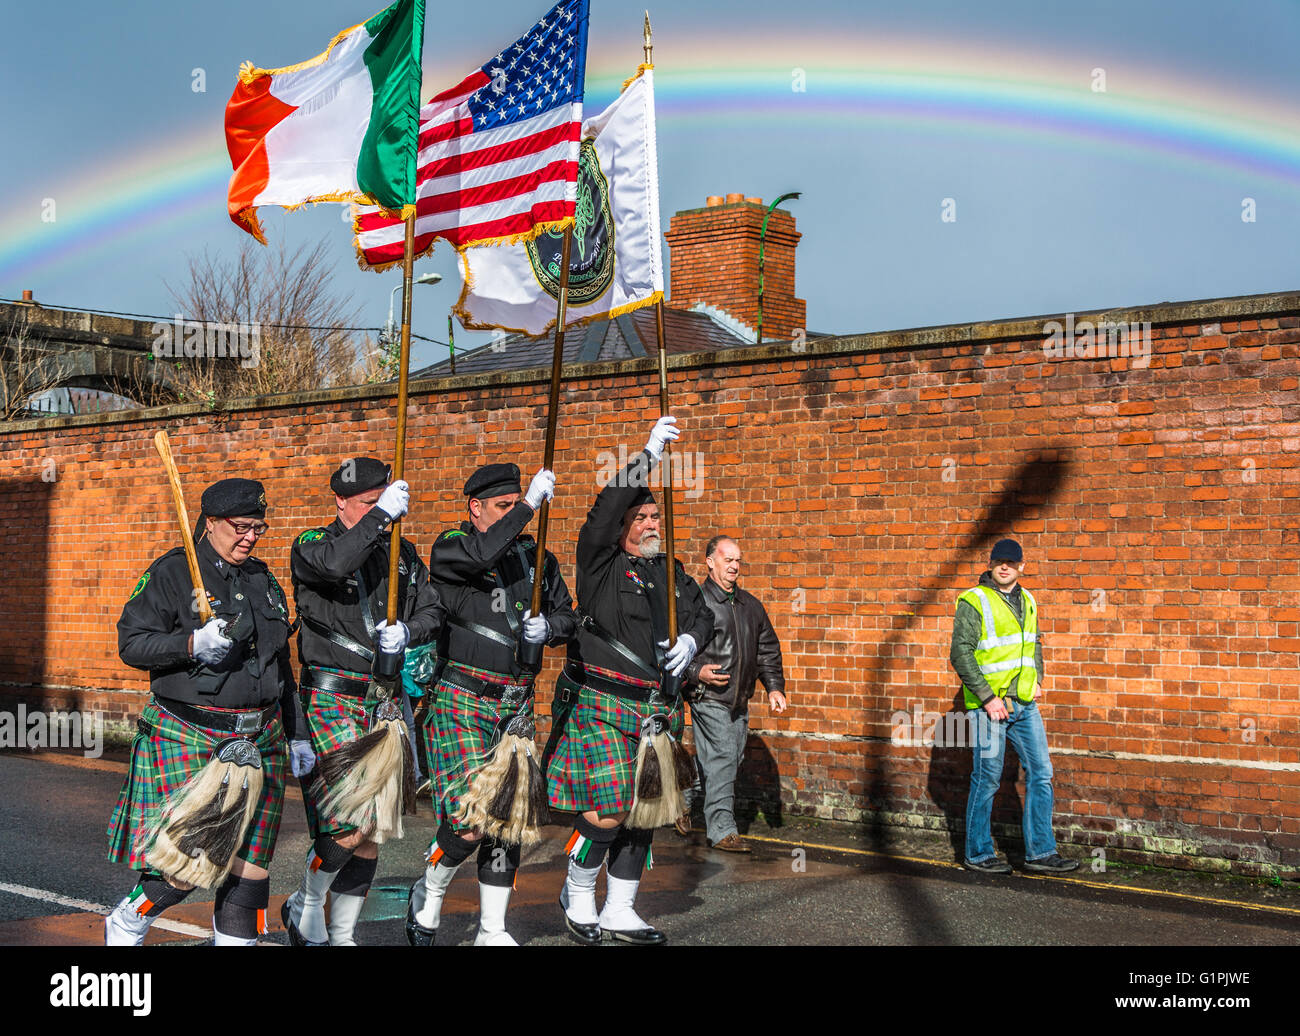 Irish American band marching through Arbour Hill in Dublin for the Easter Rising 1916 Centenary events carrying flags. Stock Photo